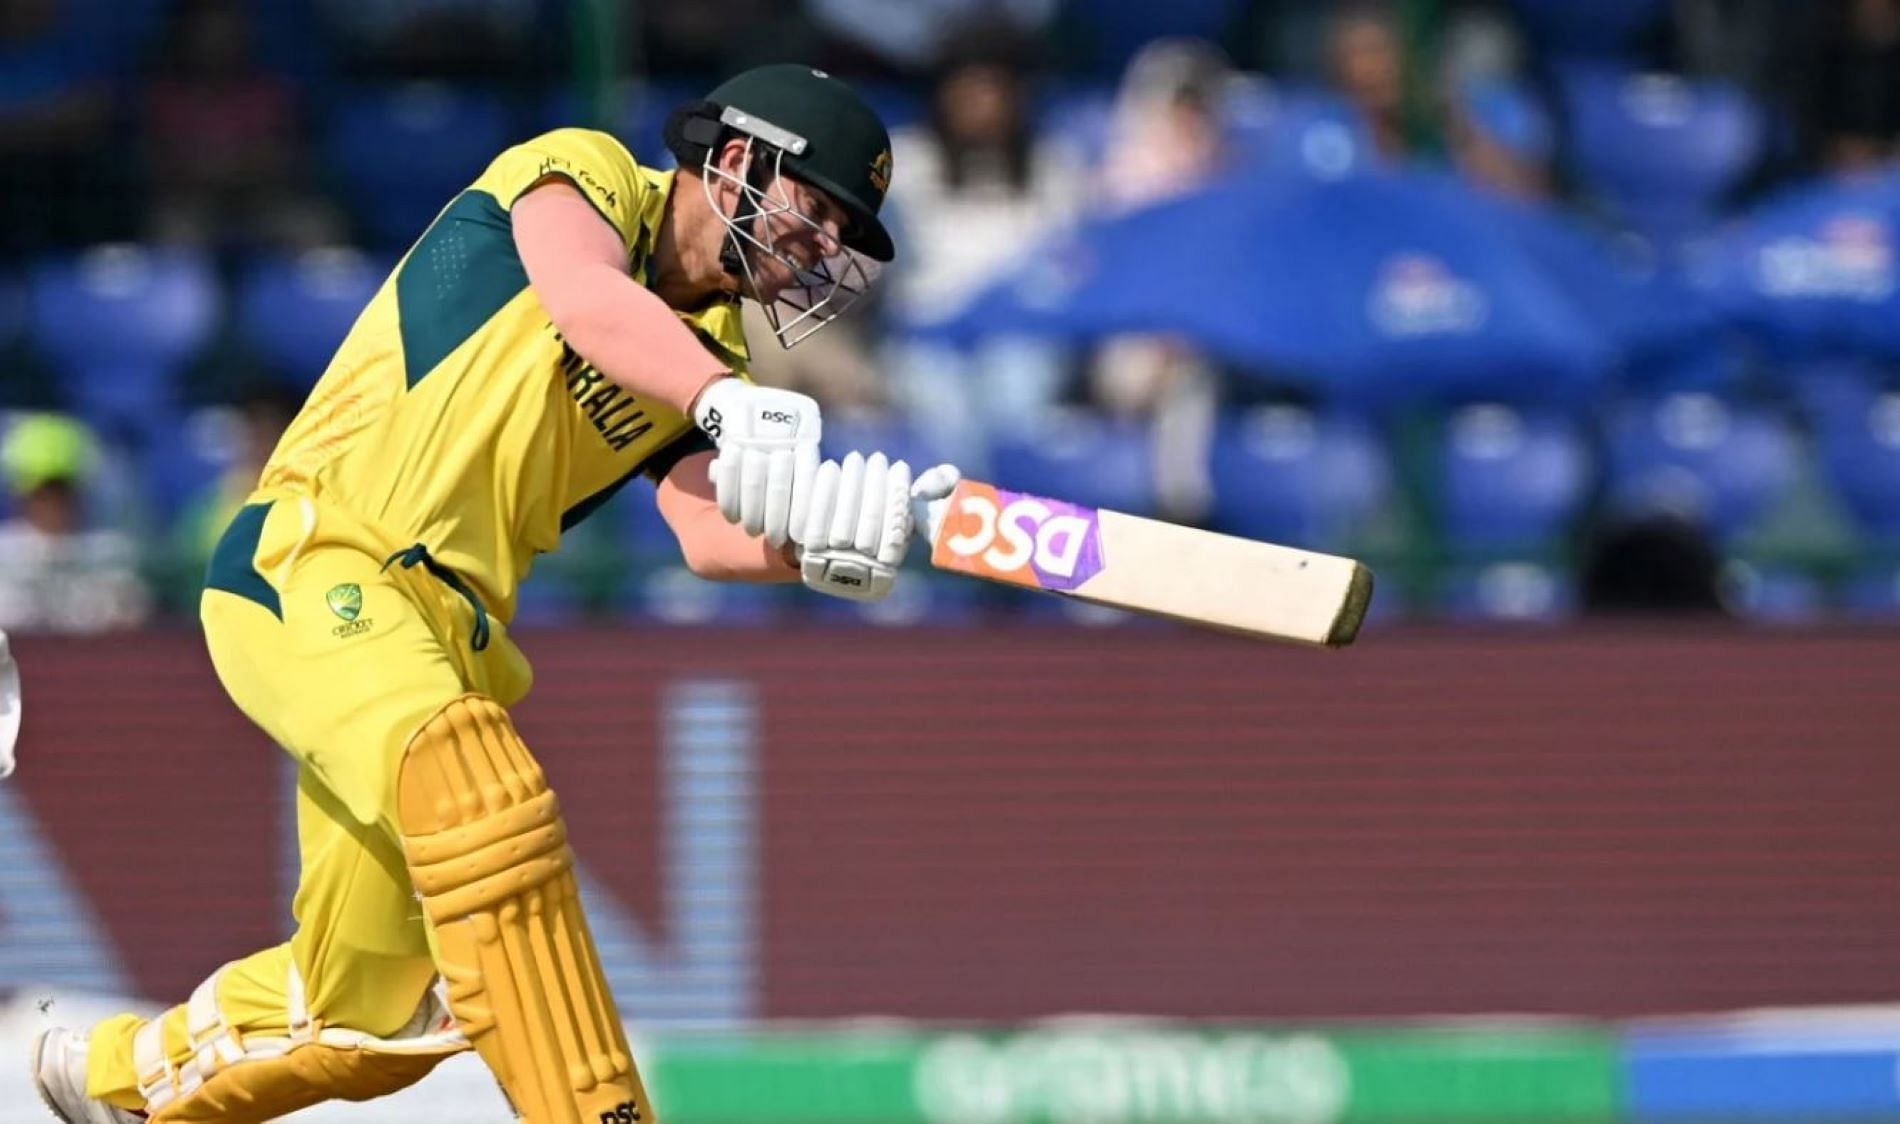 David Warner has slowly but surely rediscovered his touch in the ongoing World Cup.